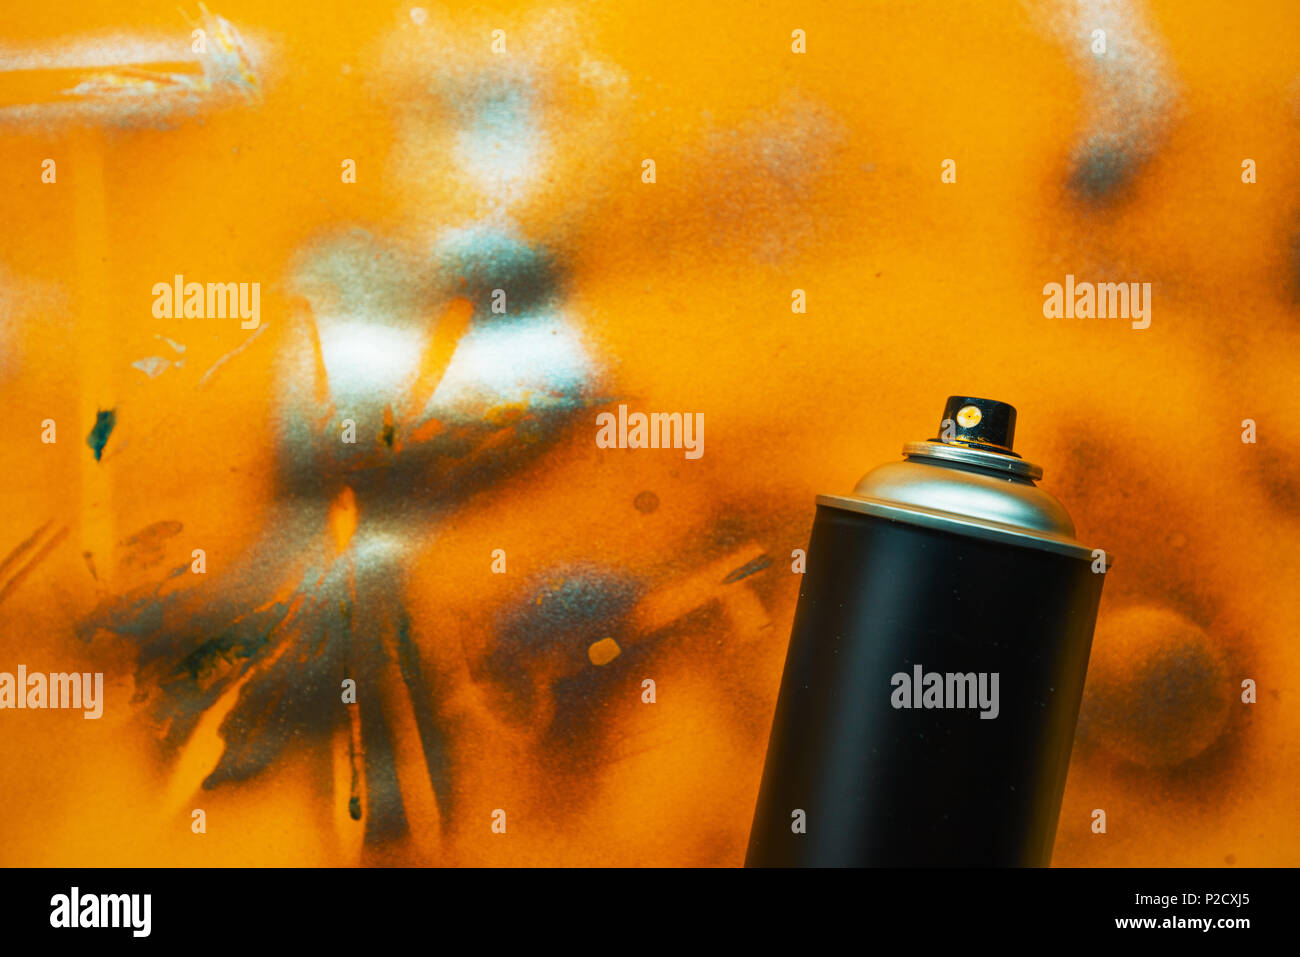 Black color spray can for graffiti artwork on grunge yellow background Stock Photo